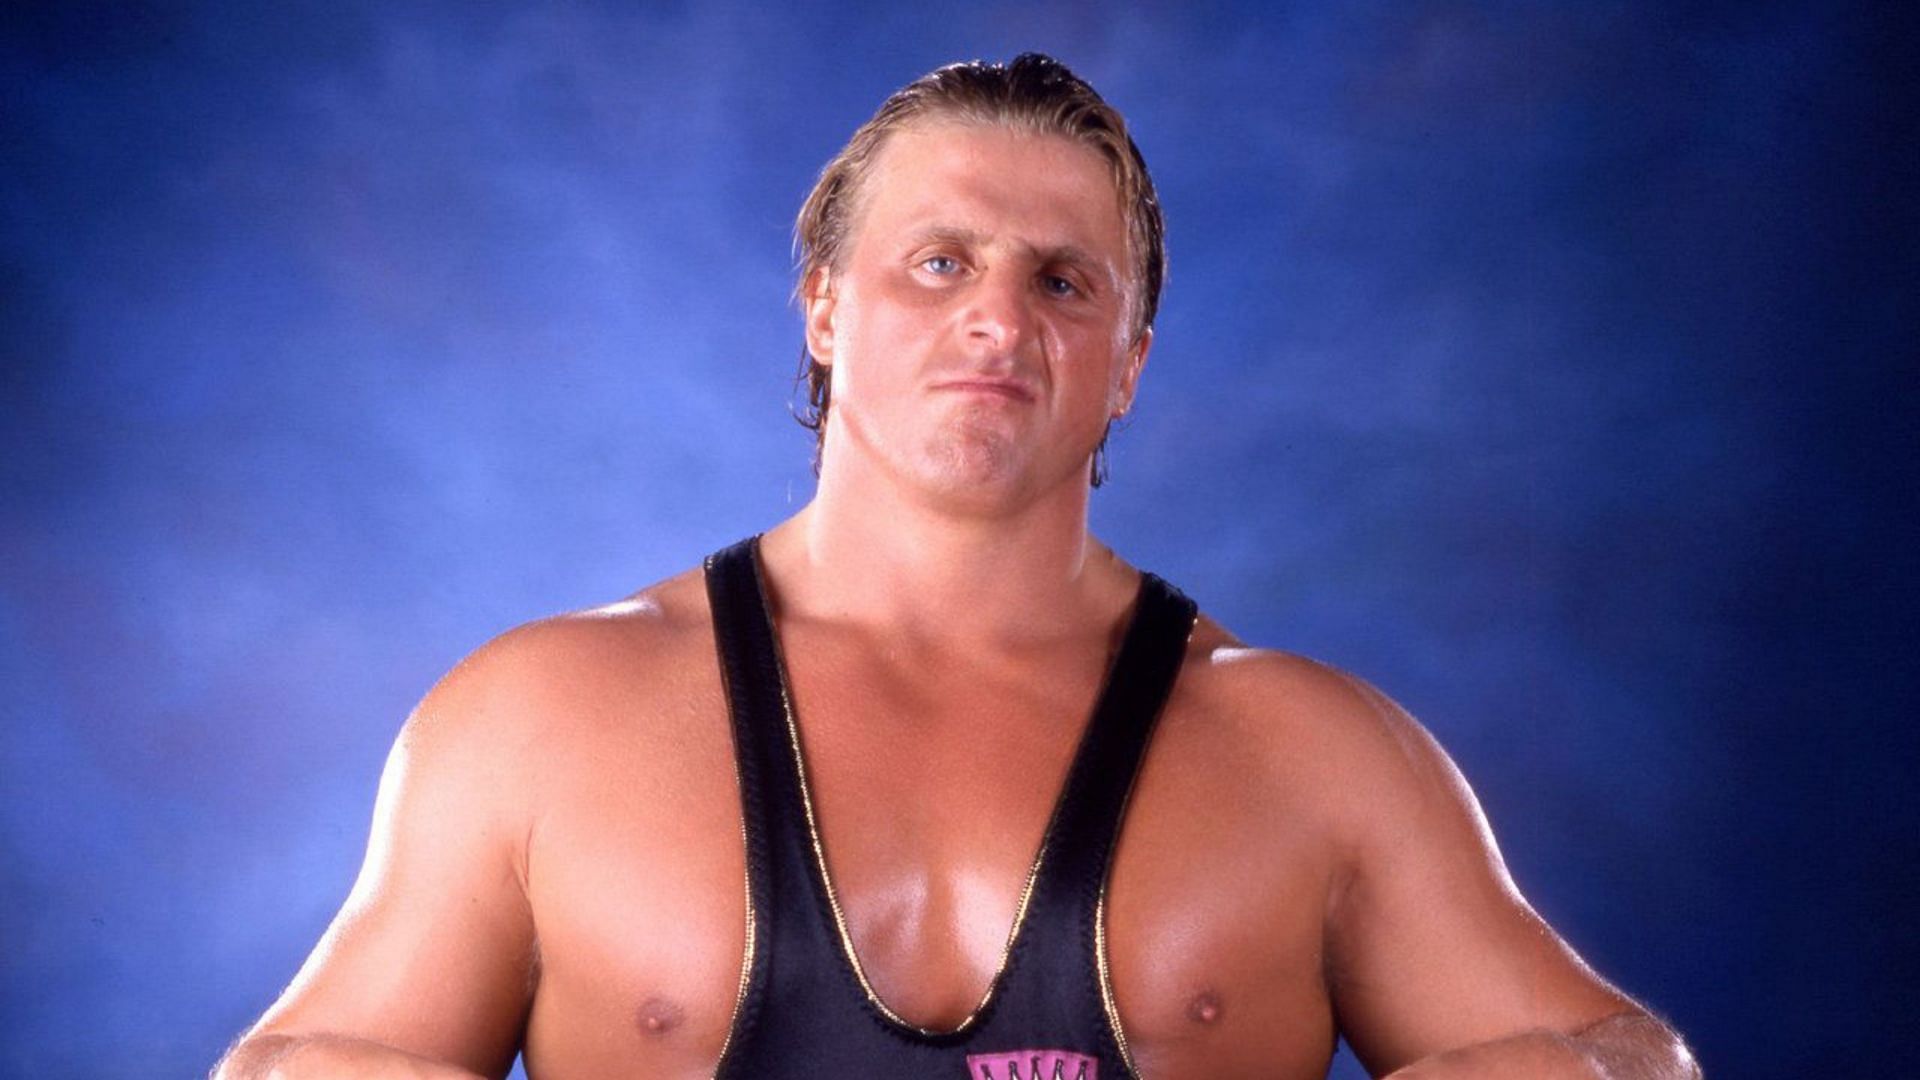 Owen Hart was only 34 years old when he died in 1999